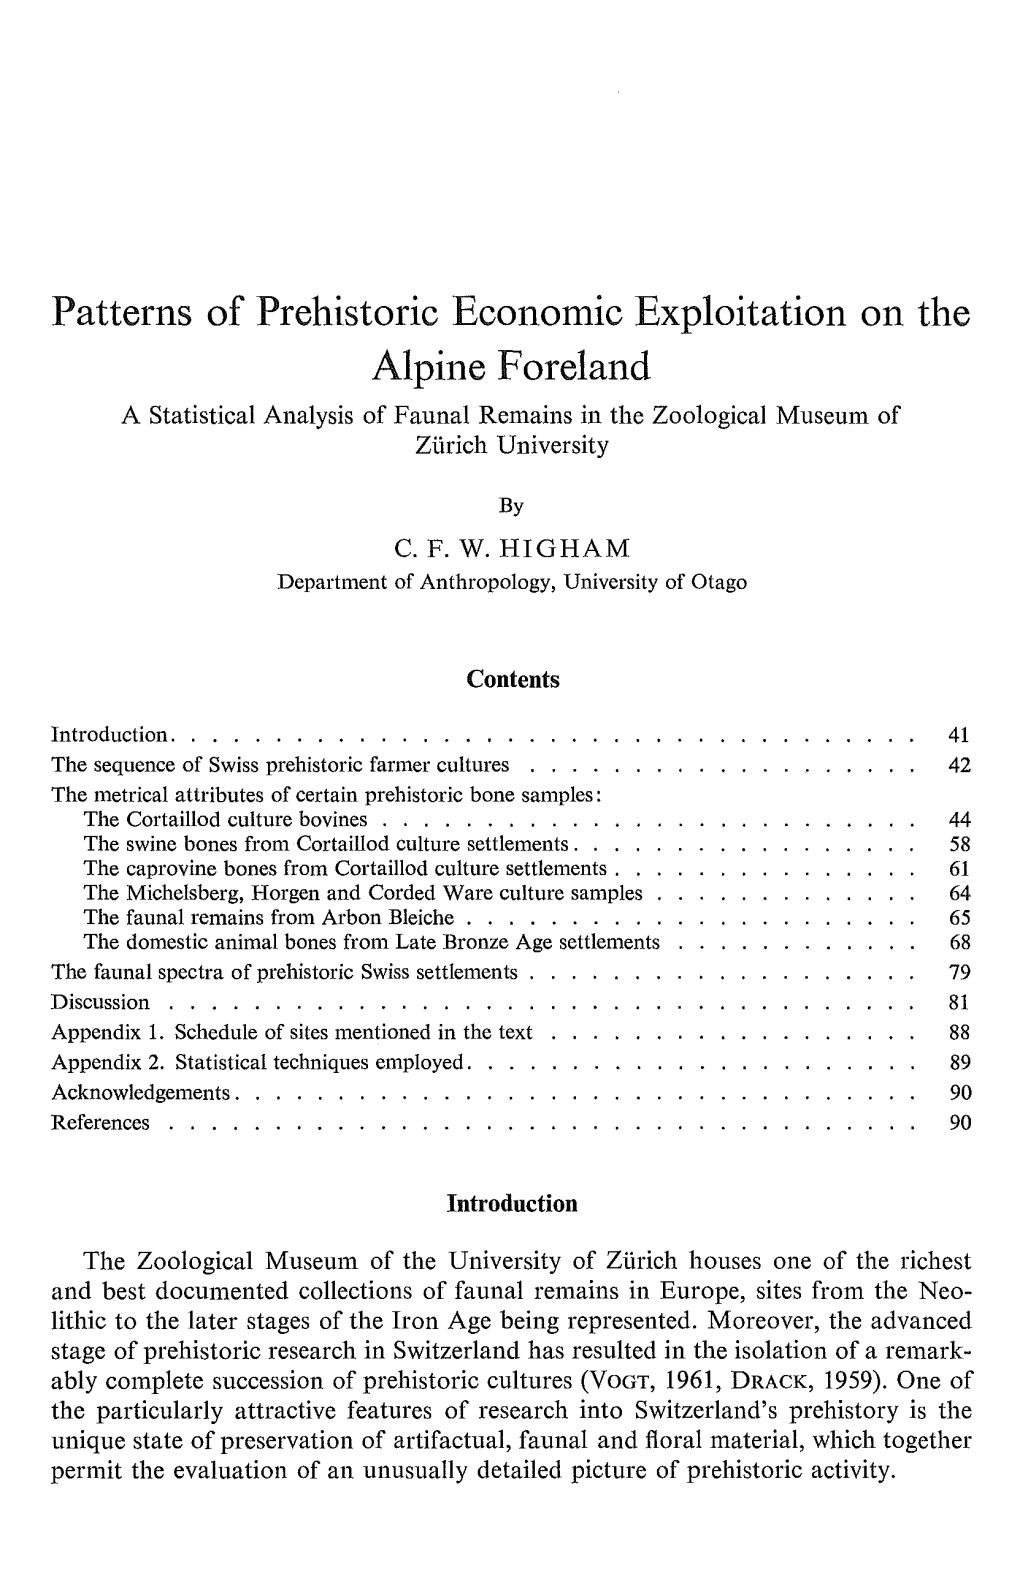 Patterns of Prehistoric Economic Exploitation on the Alpine Foreland a Statistical Analysis of Faunal Remains in the Zoological Museum of Zürich University